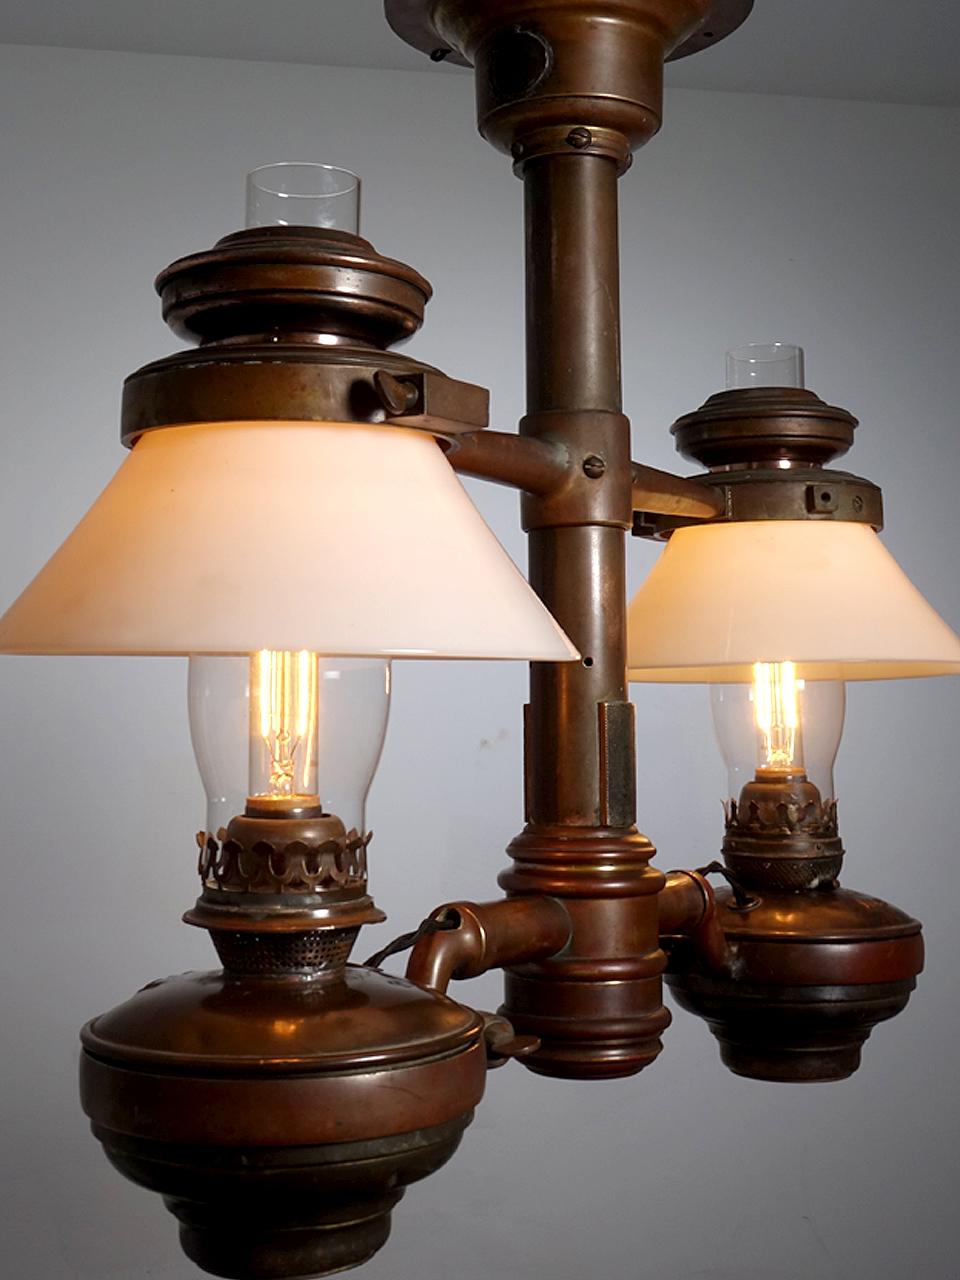 Few of these luxury class Victorian RR lamps still exist. Any remaining examples have found their way into museums. This was the type and quality of center lighting used in private luxury Pullman cars of that era. They were also part of the